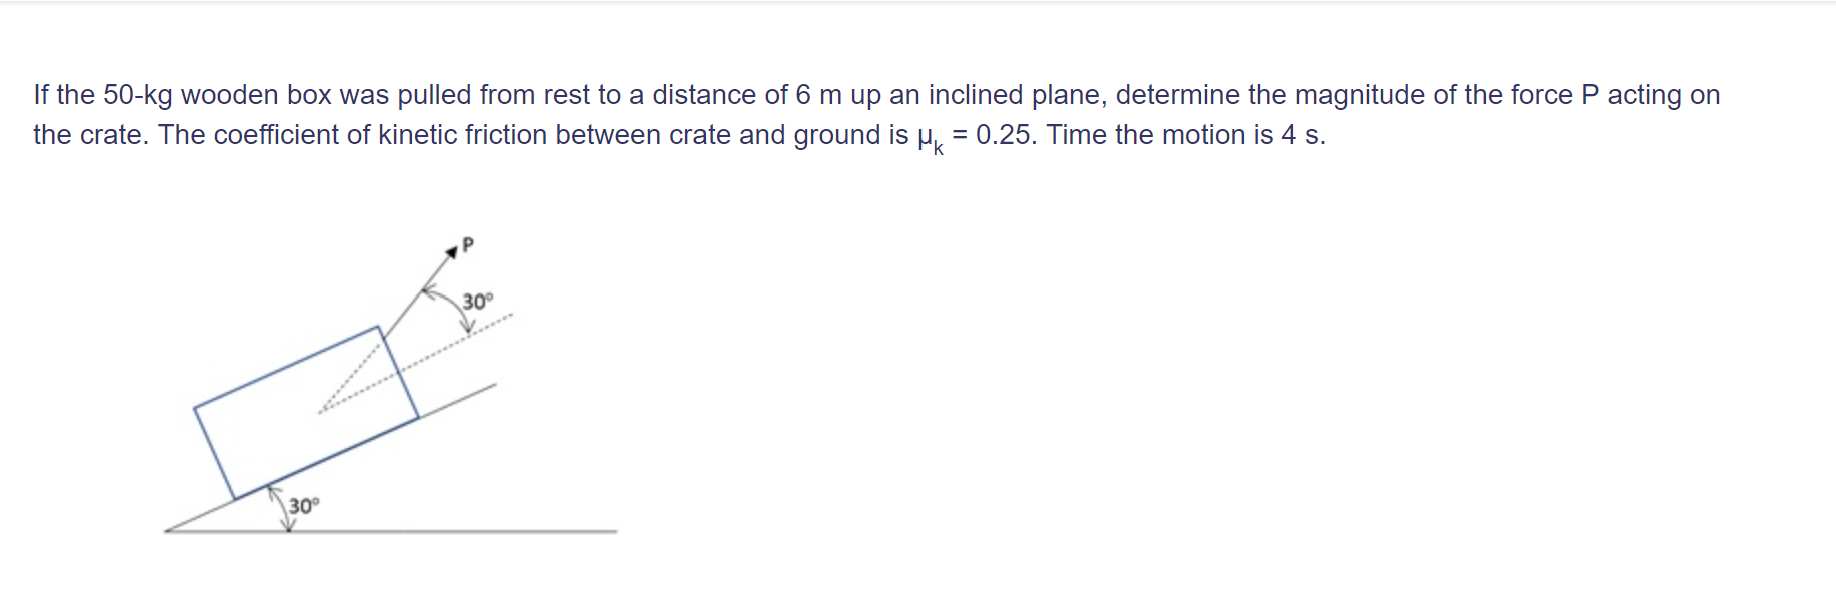 If the 50-kg wooden box was pulled from rest to a distance of 6 m up an inclined plane, determine the magnitude of the force P acting on
the crate. The coefficient of kinetic friction between crate and ground is µ, = 0.25. Time the motion is 4 s.
%3D
30°
30°
